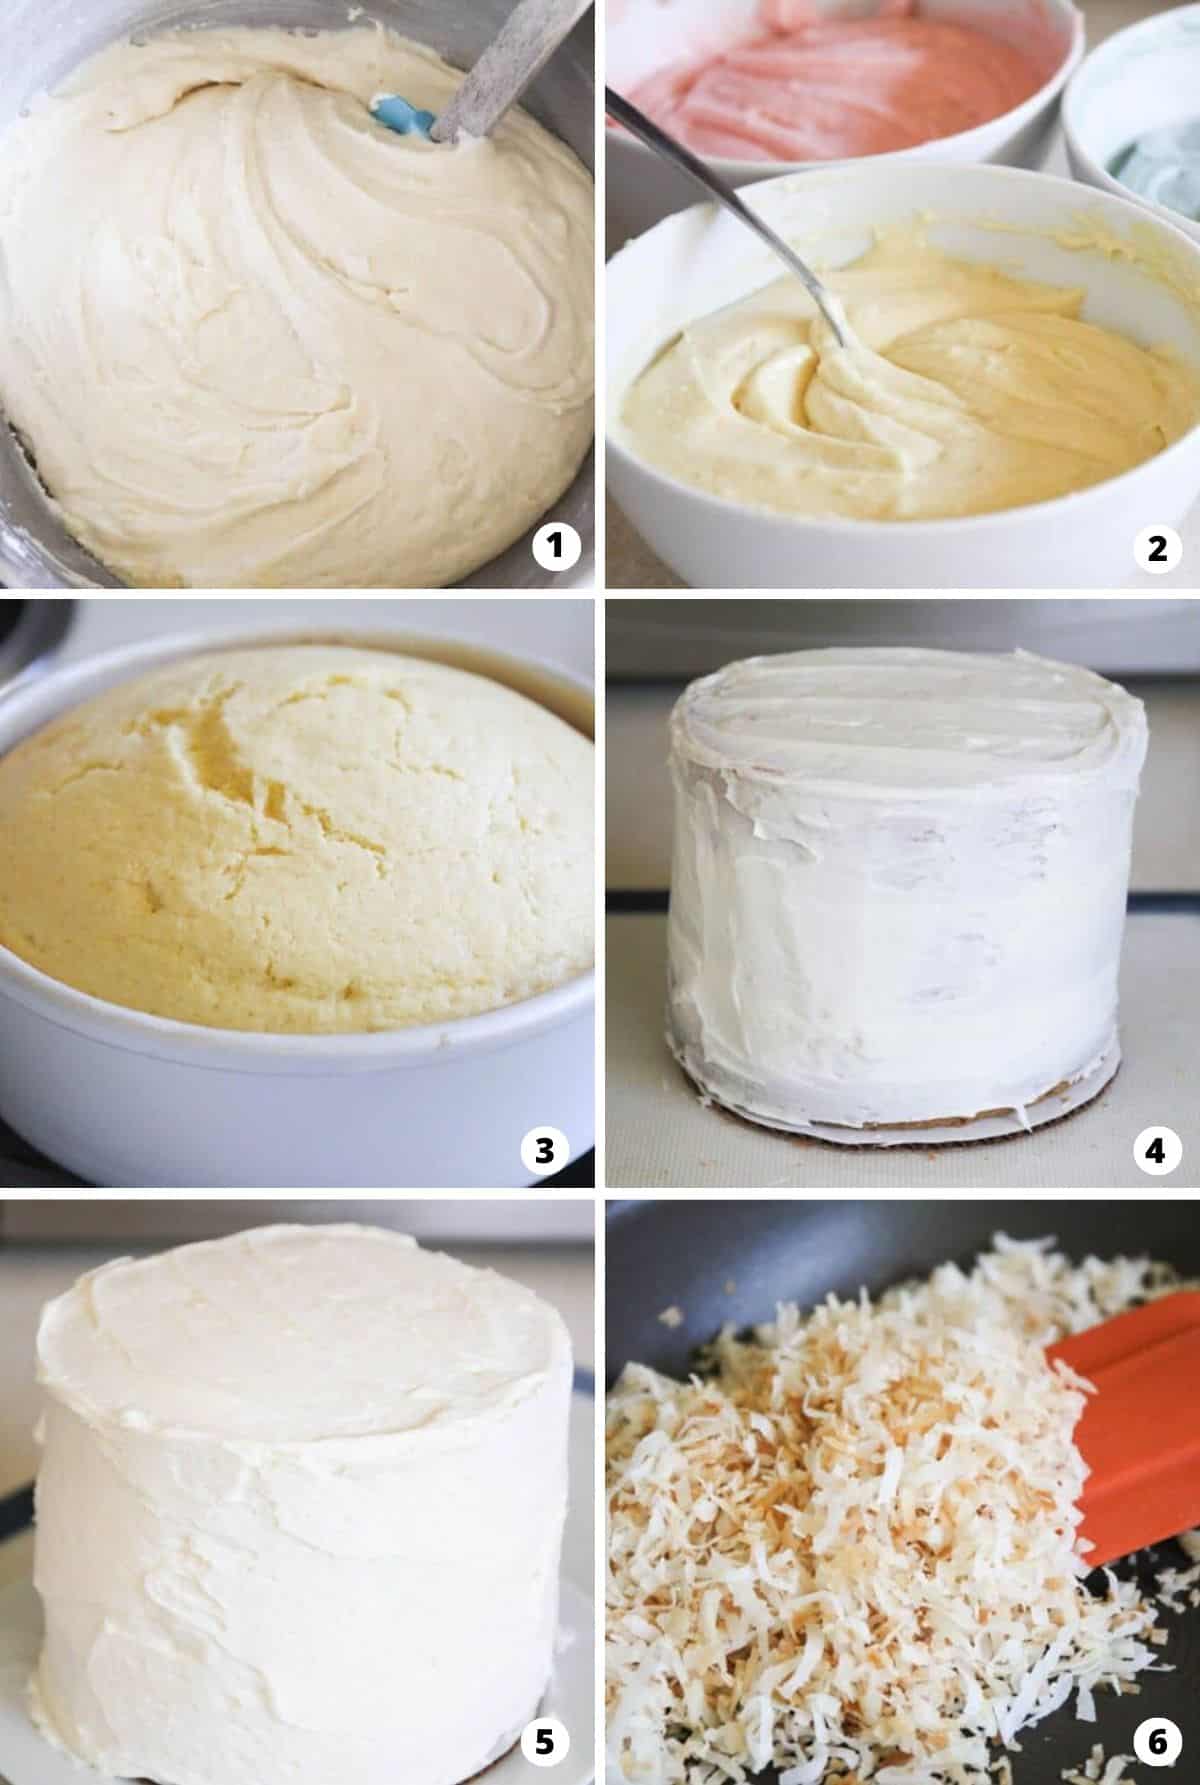 The process of making an Easter cake in 6 steps.